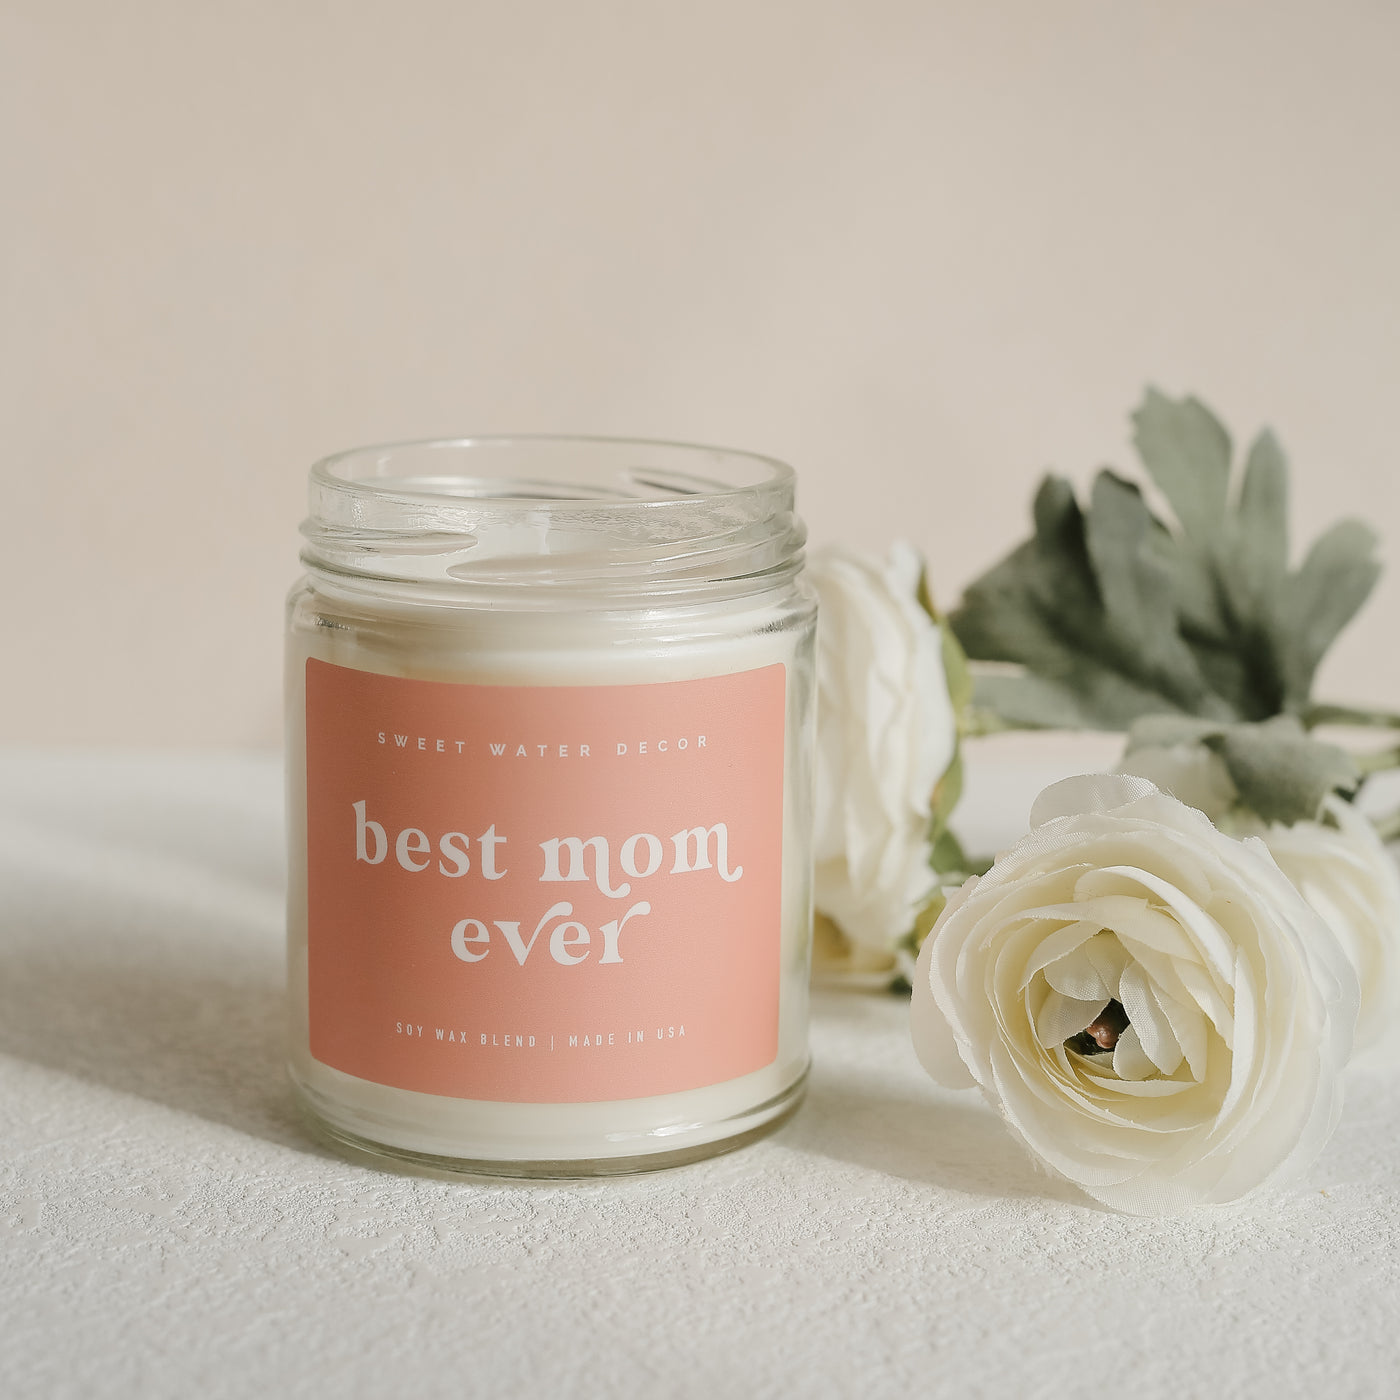 TOP 10 MUST-HAVE Mother's Day Candle Scents! #candles #diy #candlemaking 